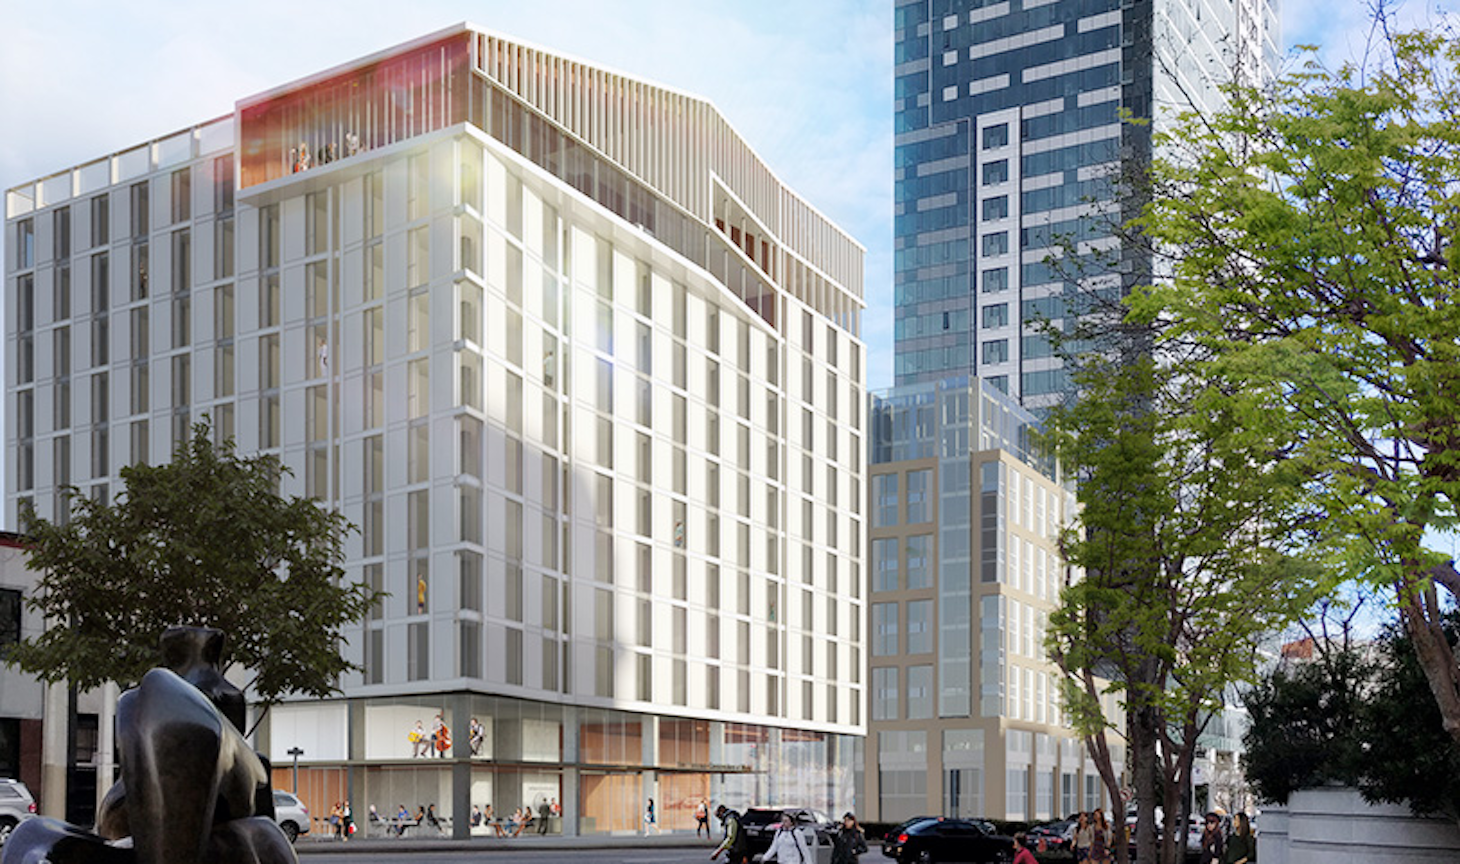 San Francisco Conservatory of Music is building performing arts center